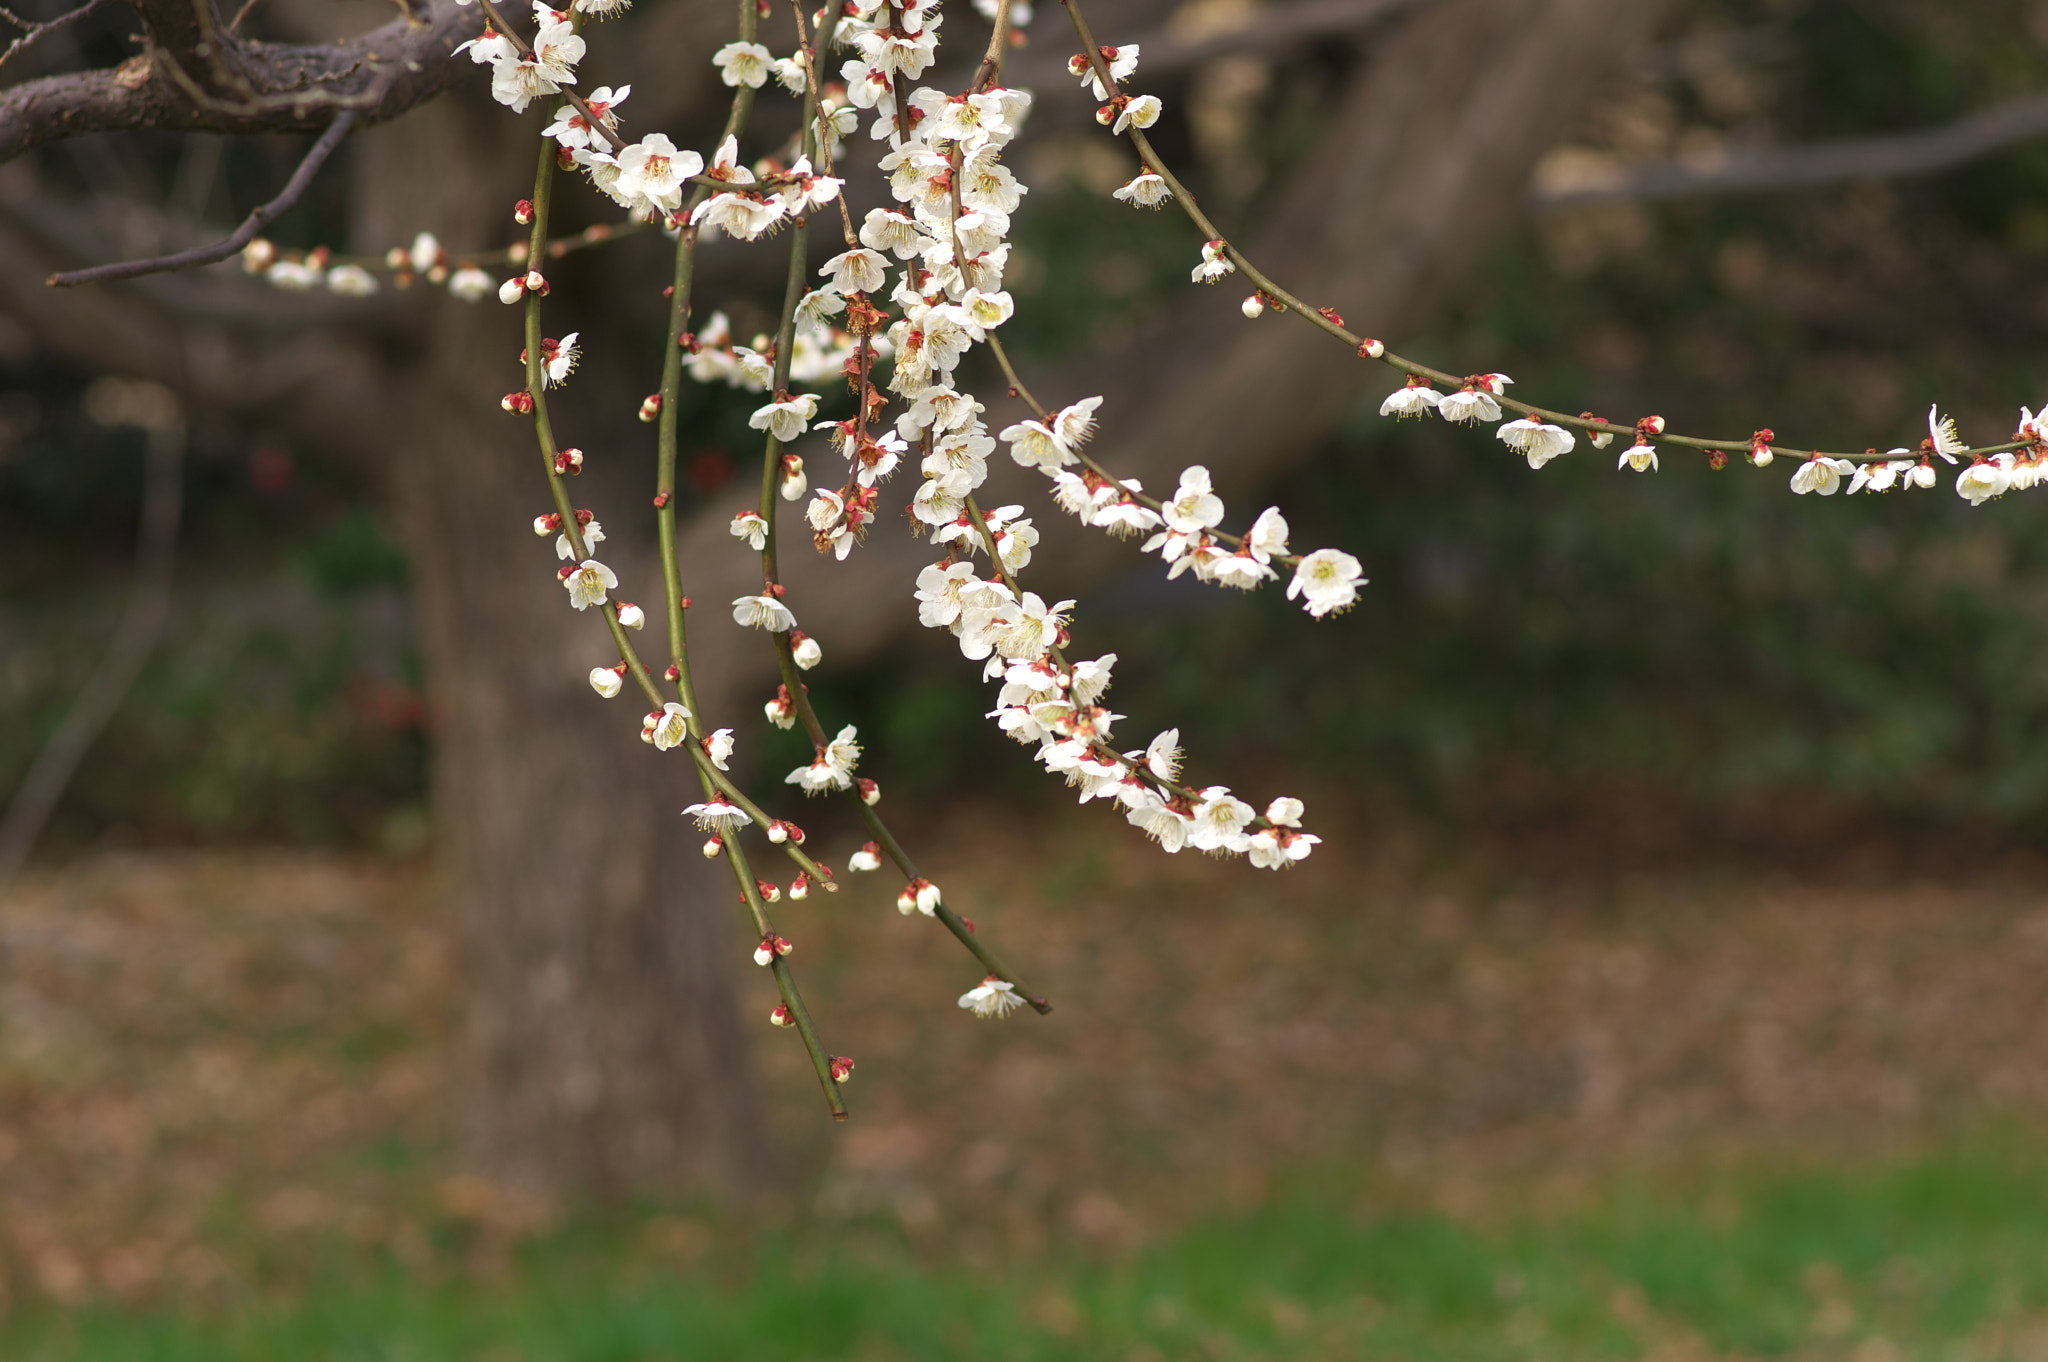 Pentax K-3 + Pentax smc FA 77mm 1.8 Limited sample photo. Plum trees at the park today.... photography